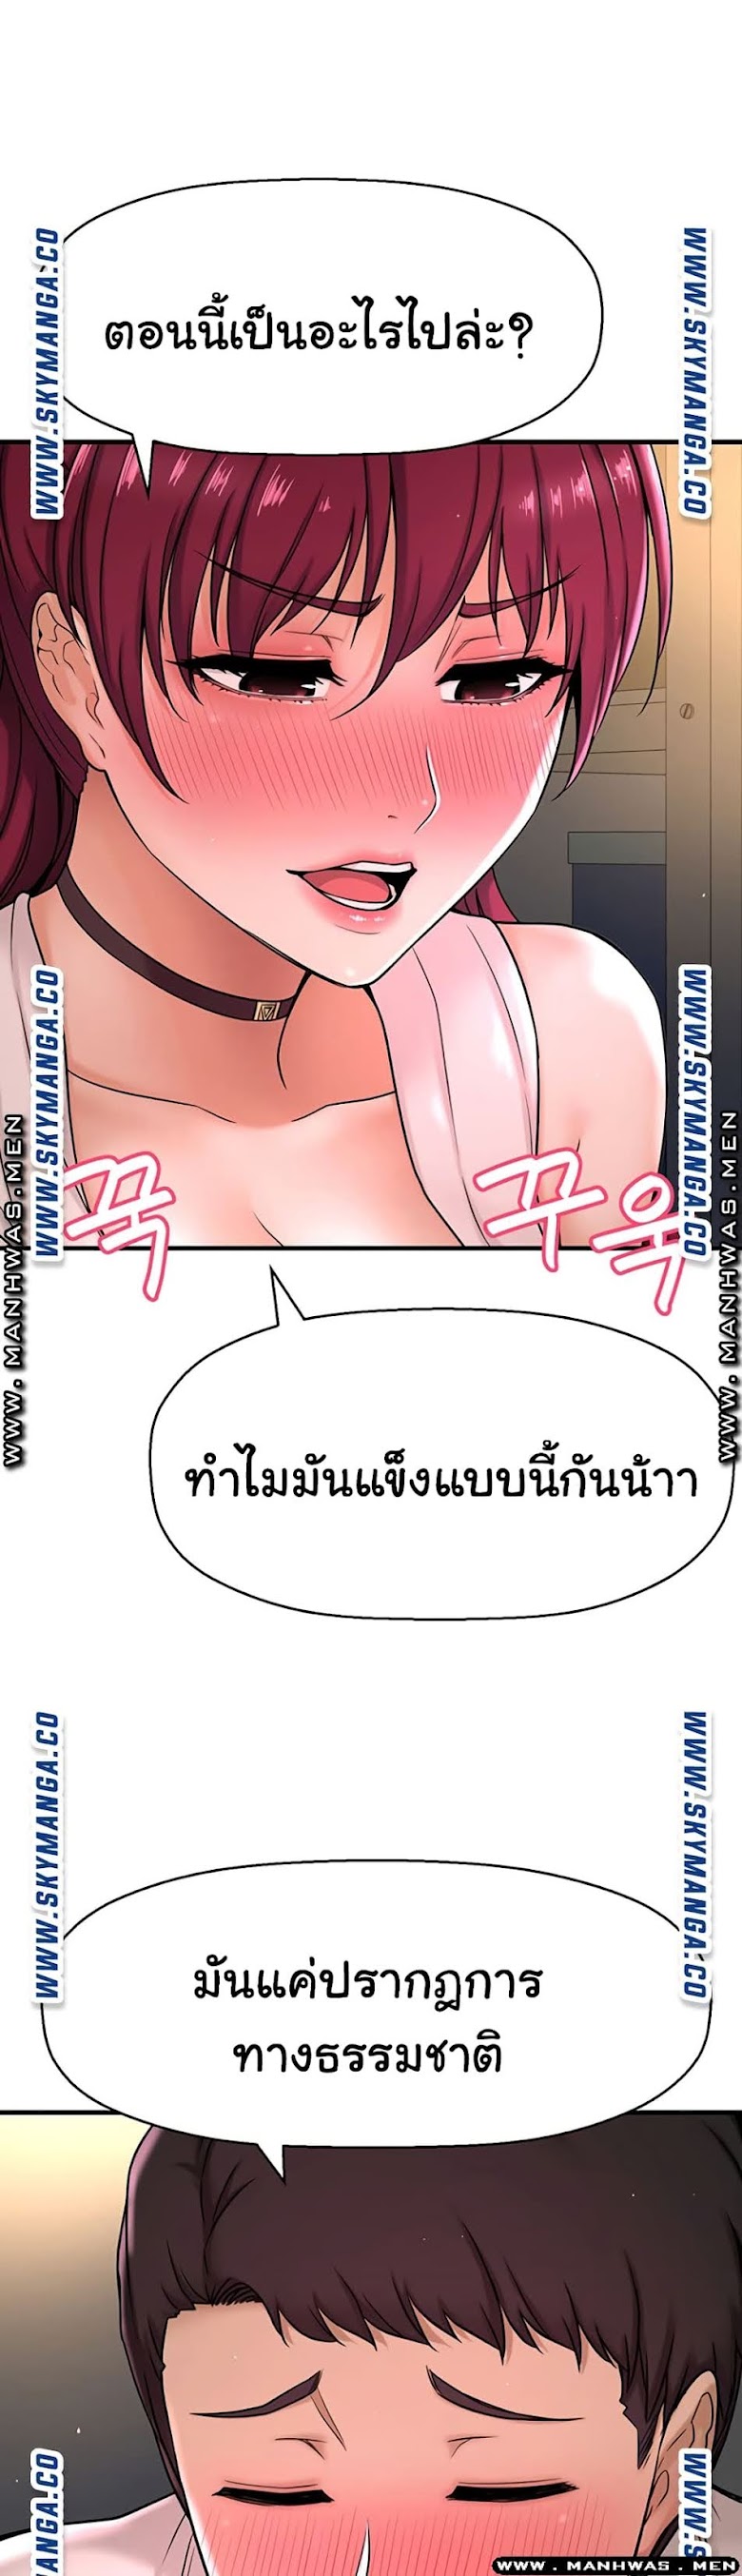 I Want to Know Her - หน้า 42